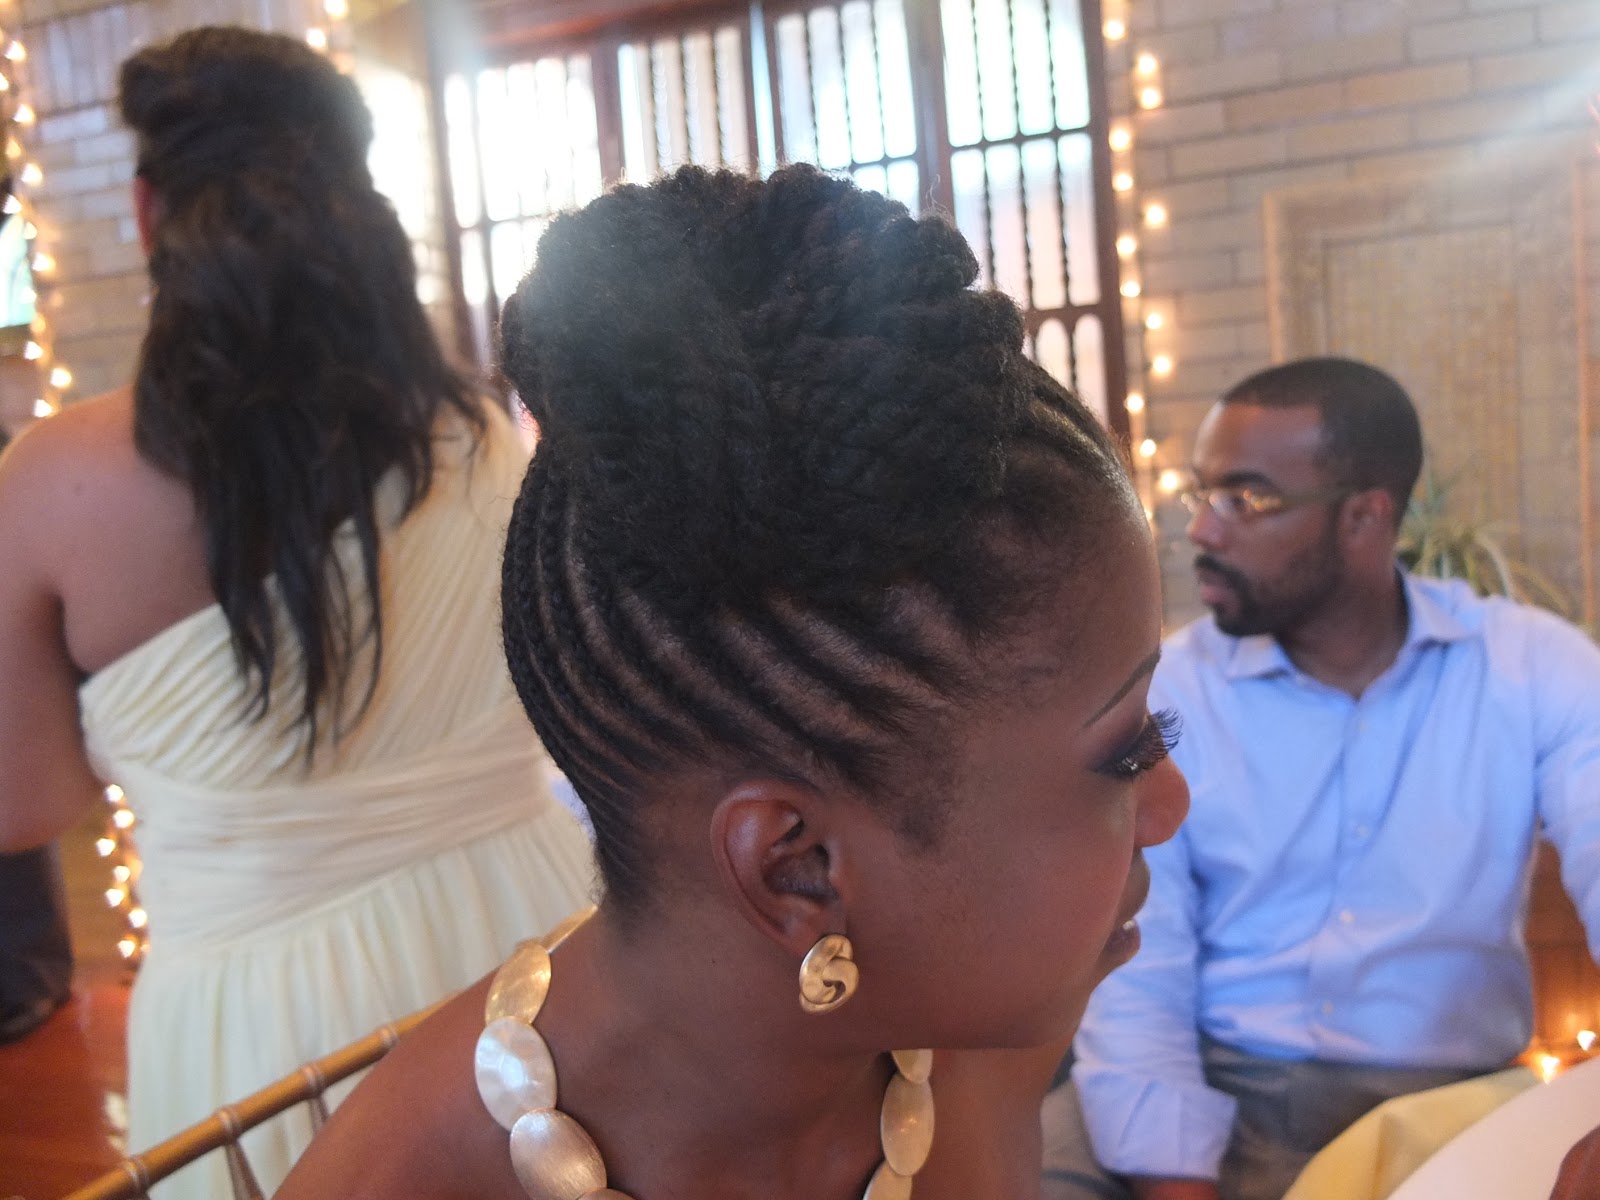 Braided Hairstyles For Black Women 2013 Sweet do, huh! I love it! and she styled it well. Naturalista! Anyhoo 